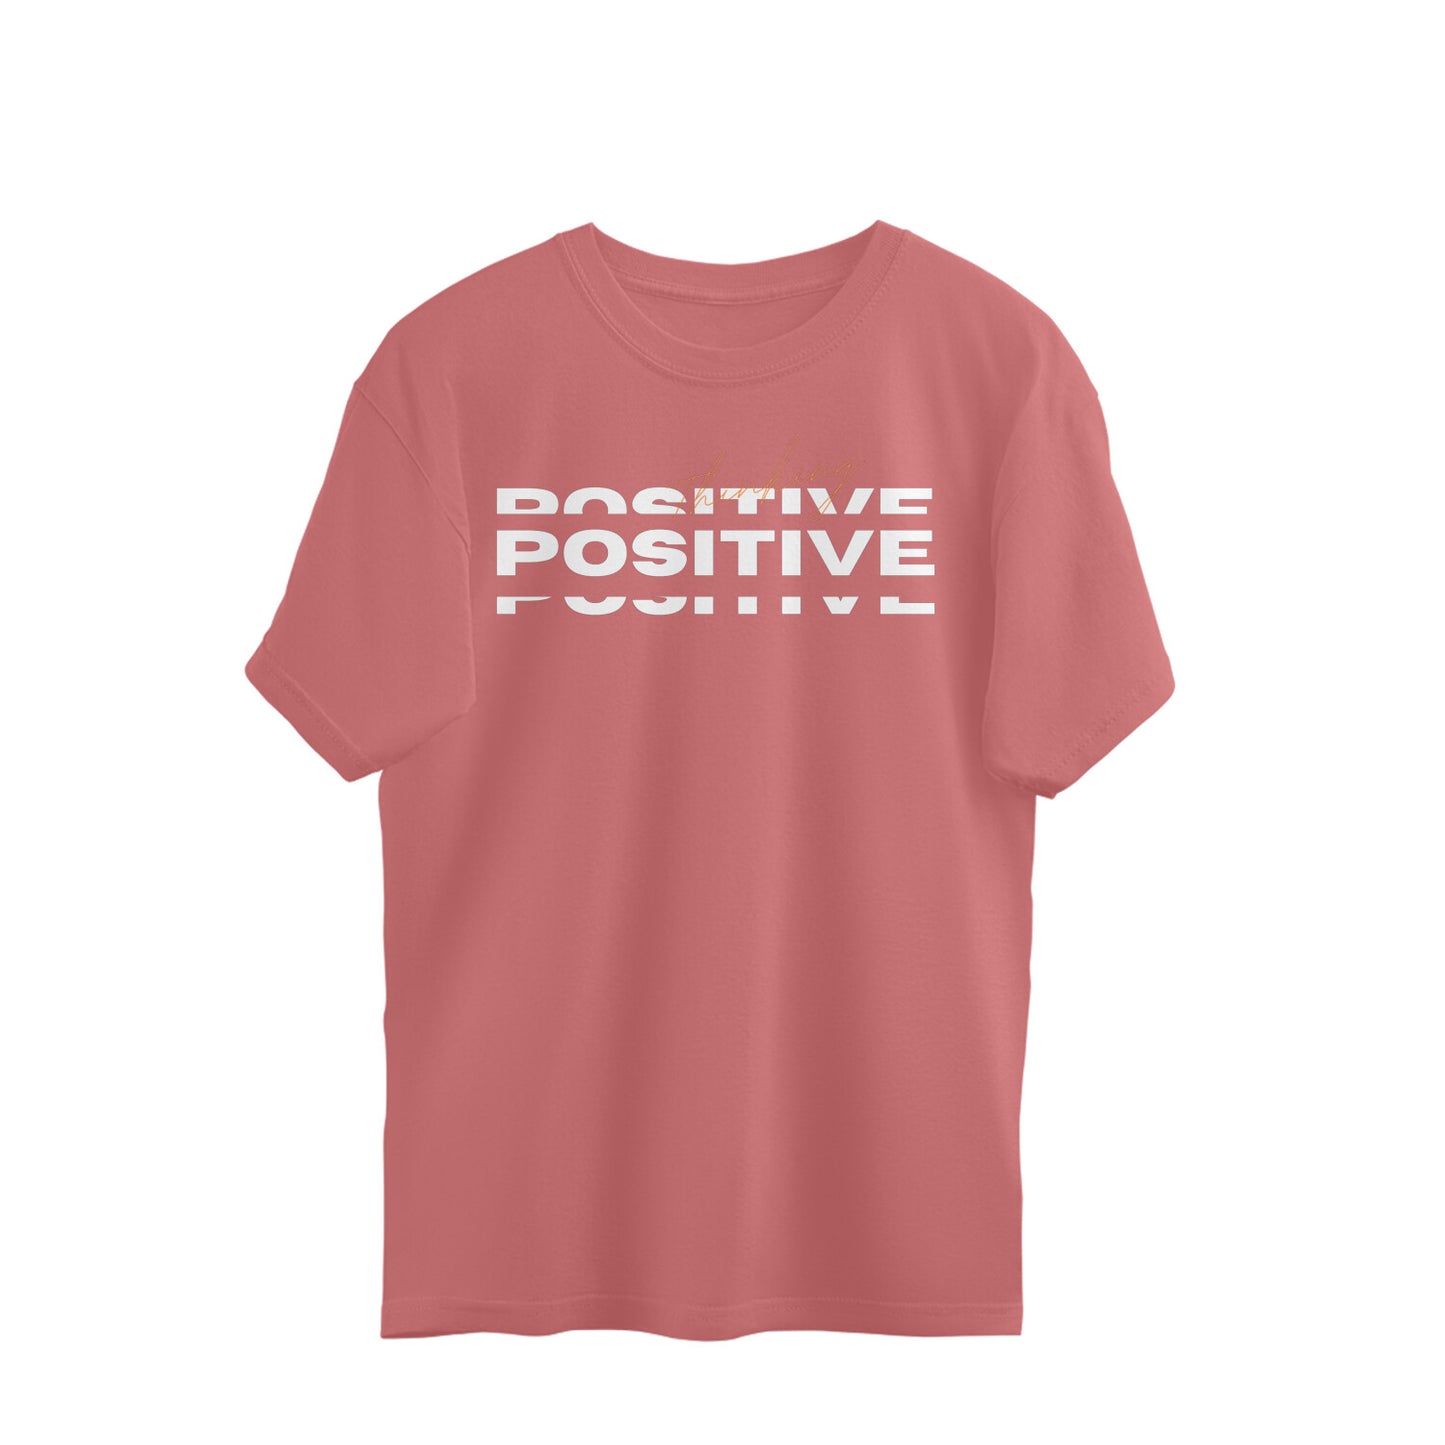 Positive Over sized T-shirt